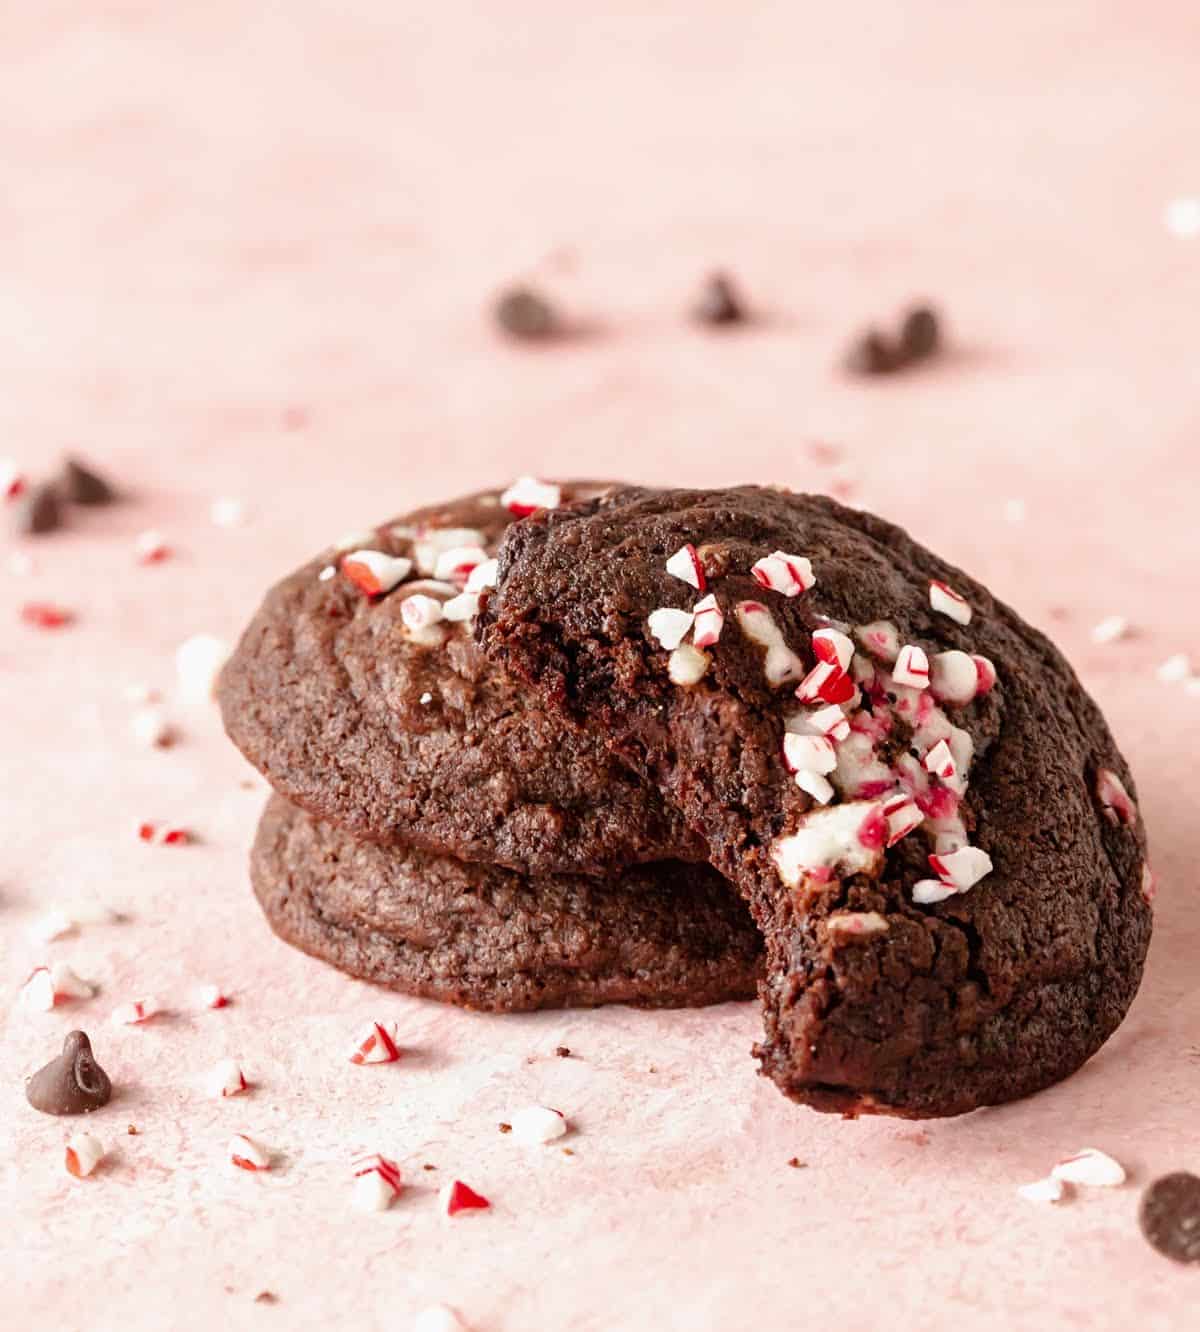 Stack of three chocolate peppermint cookies, one bitten, pink background.